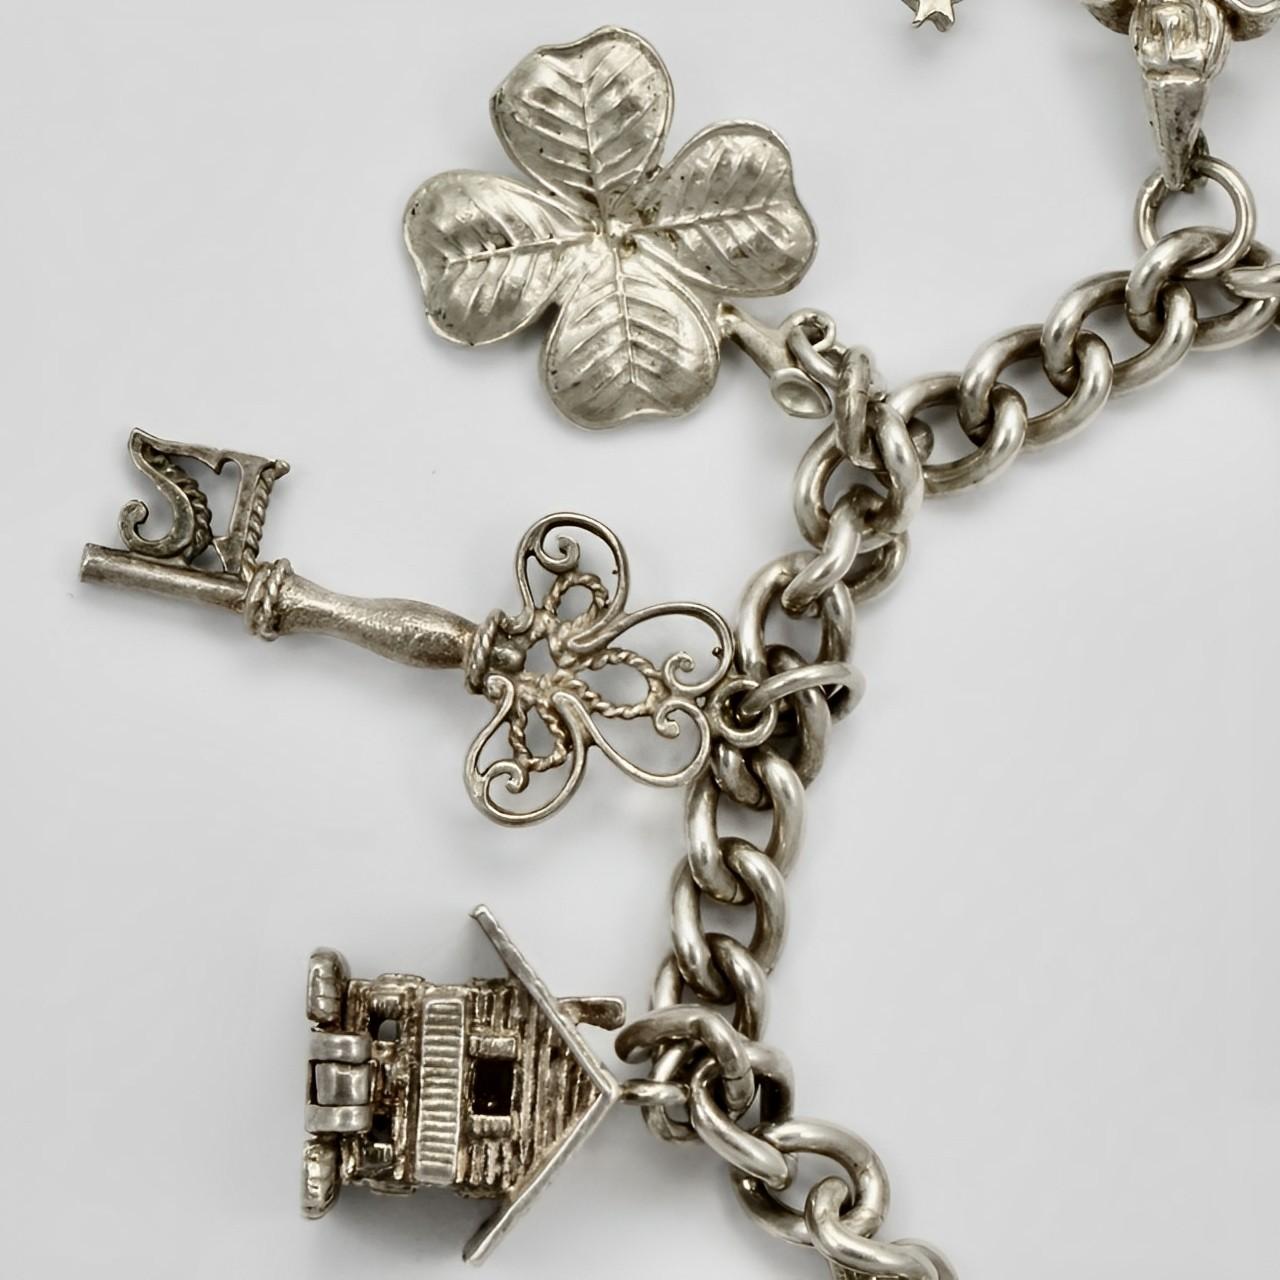 English Sterling Silver Charm Bracelet 1970s In Good Condition For Sale In London, GB